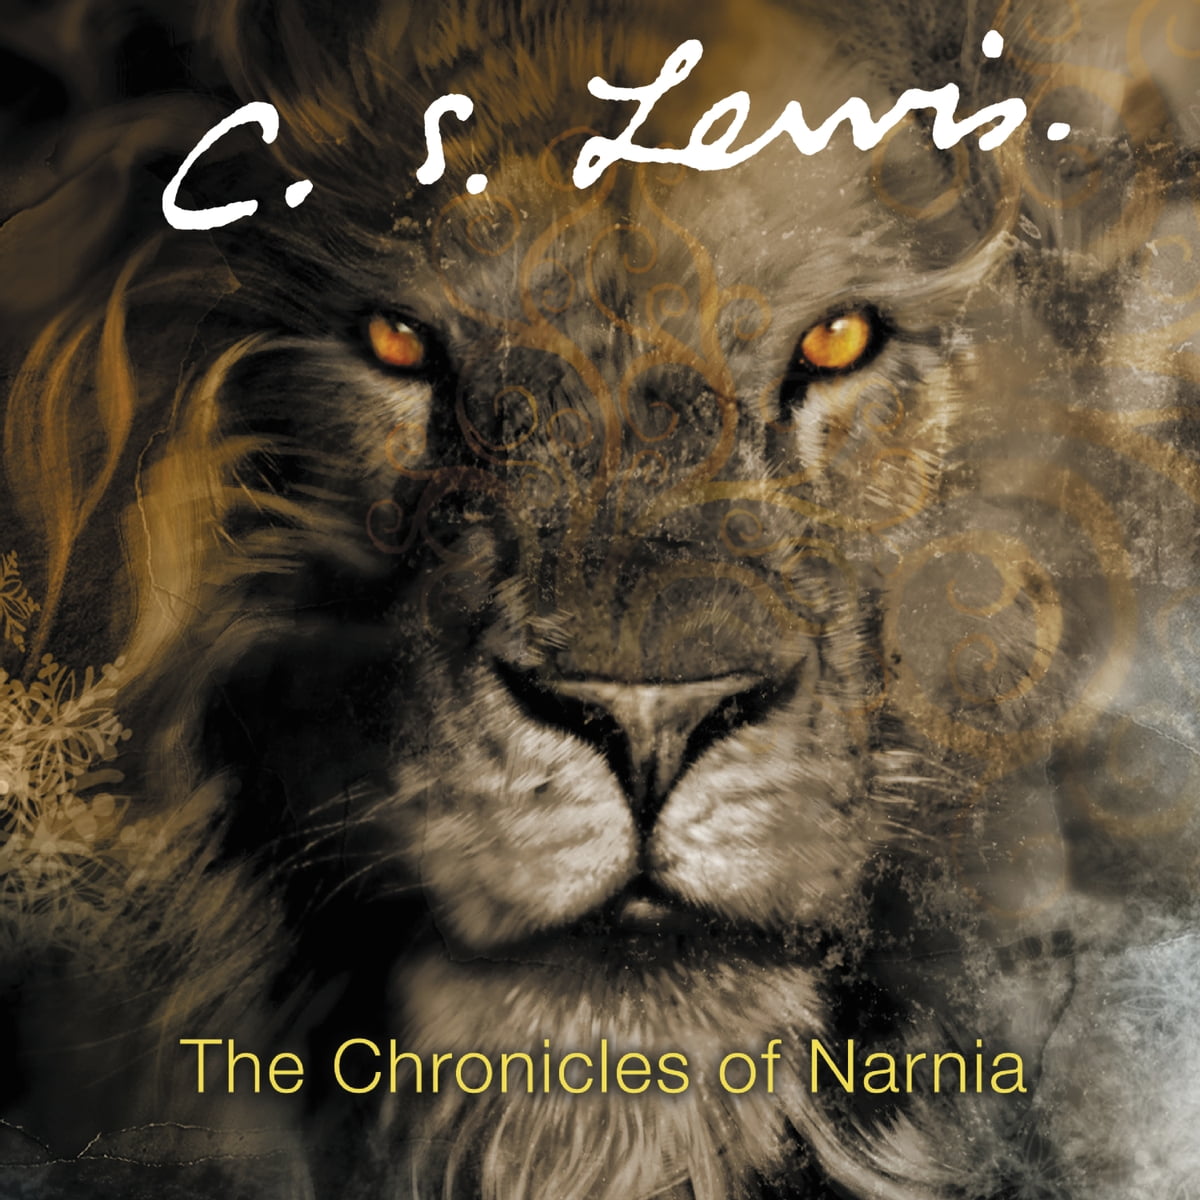 The Chronicles of Narnia Complete Audio Collection byC S Lewis Audiobook. 51.99 USD